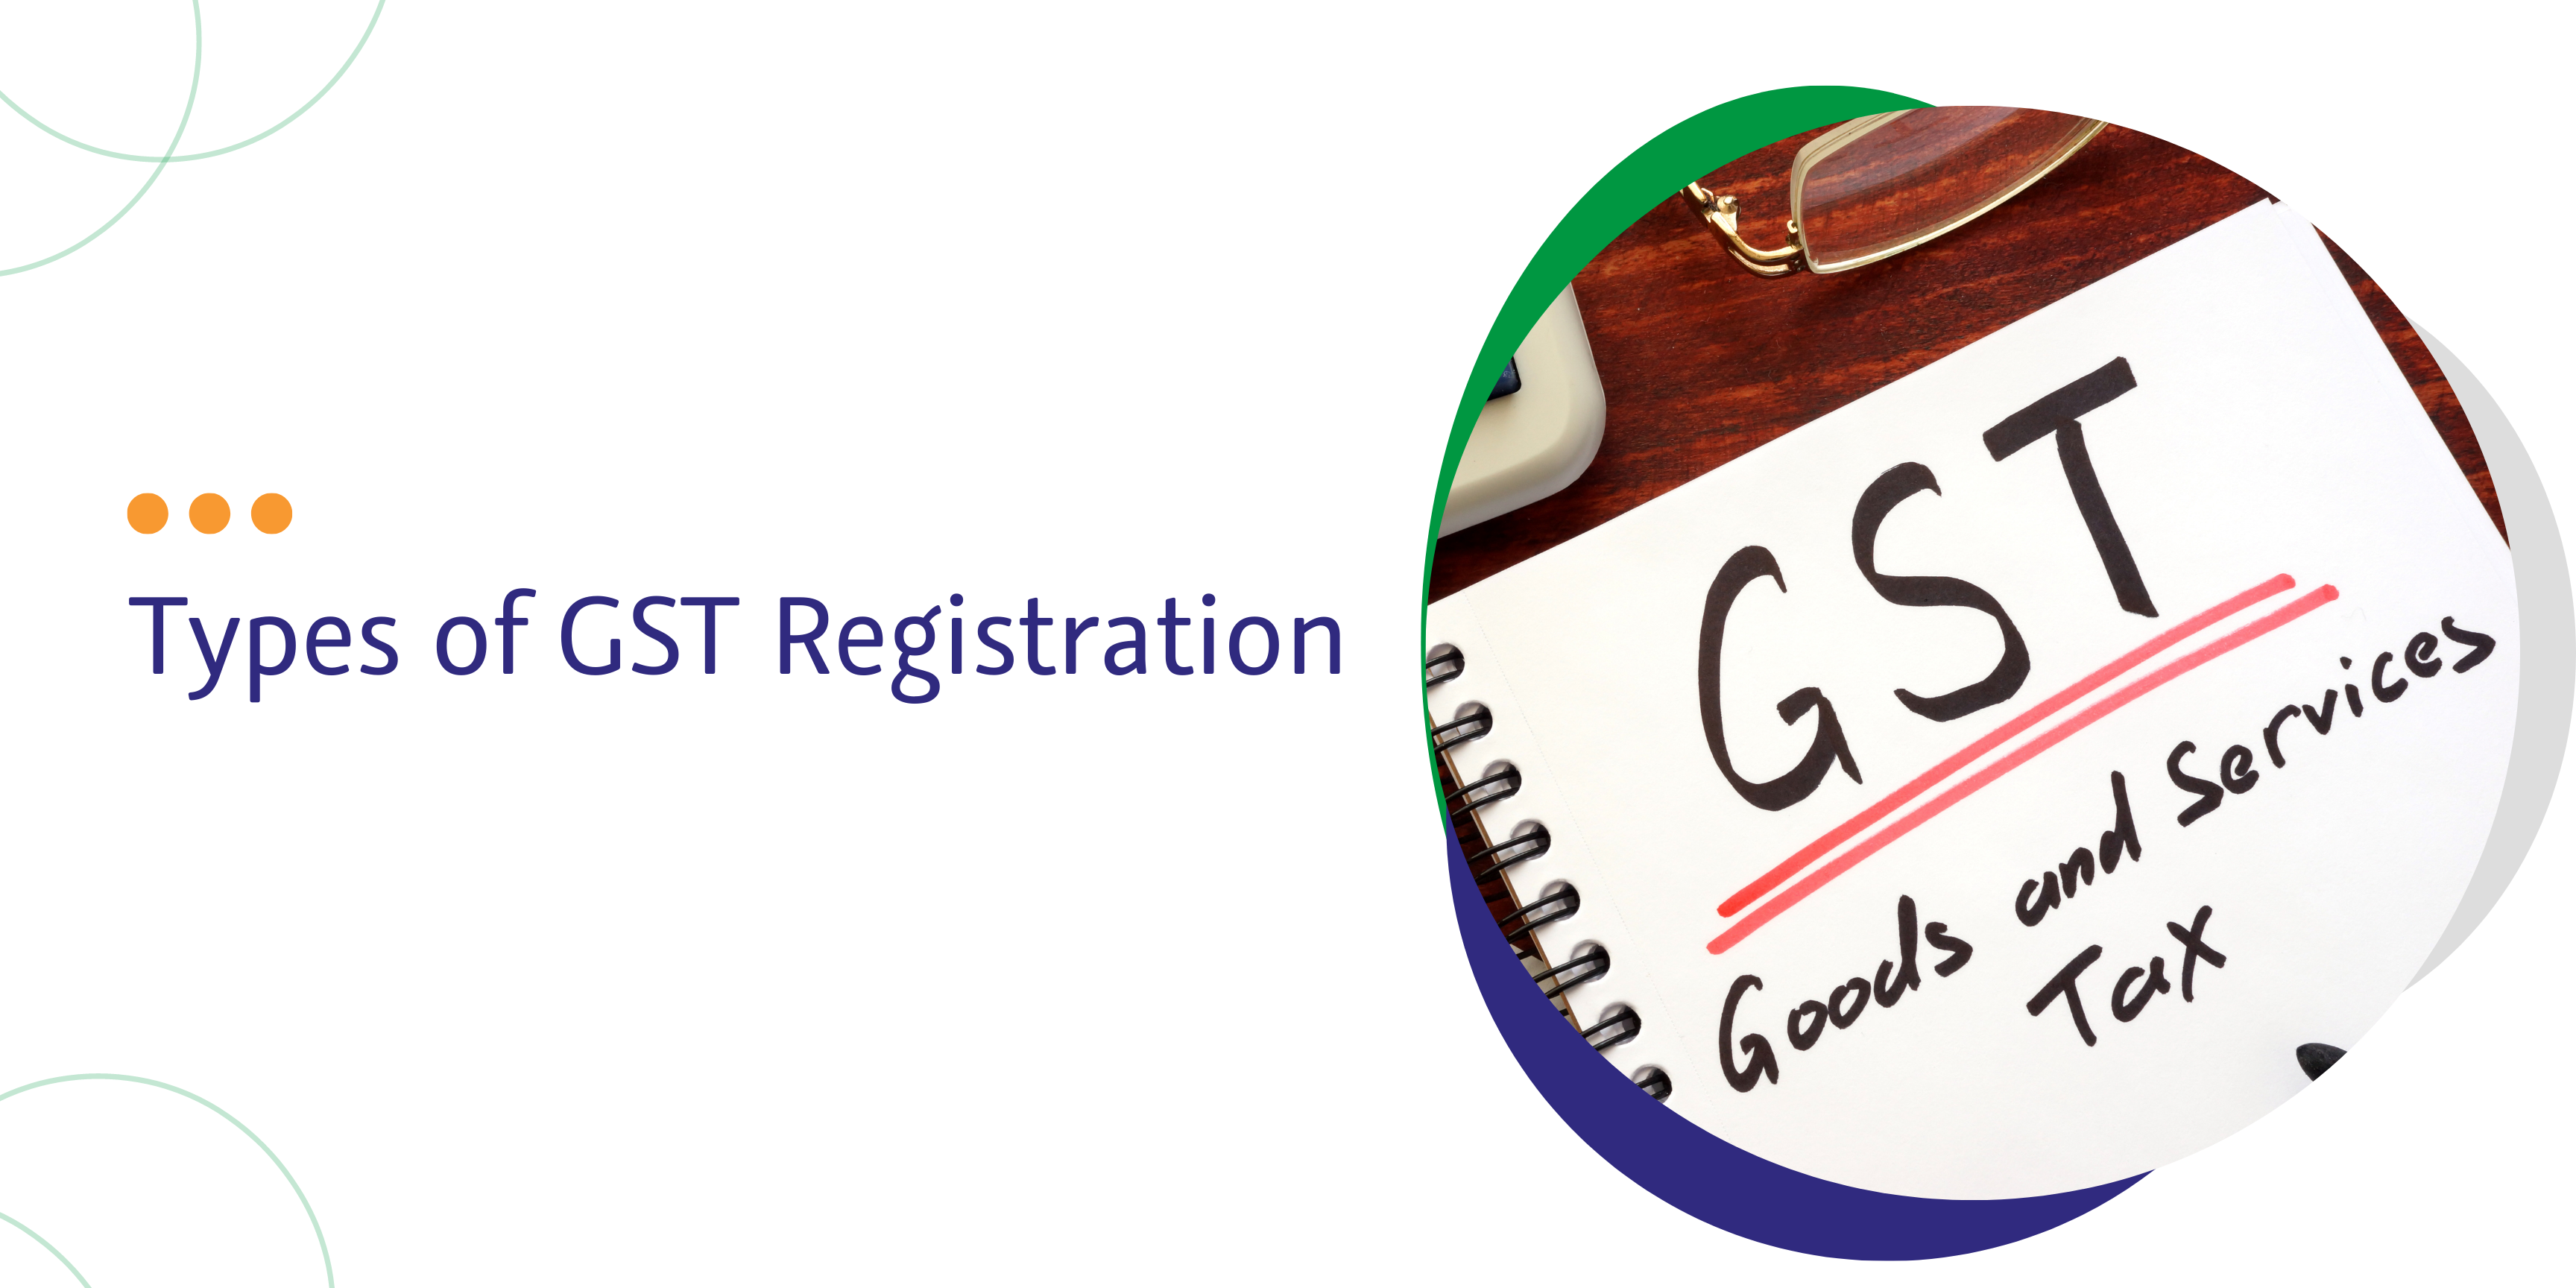 Types of GST Registrations